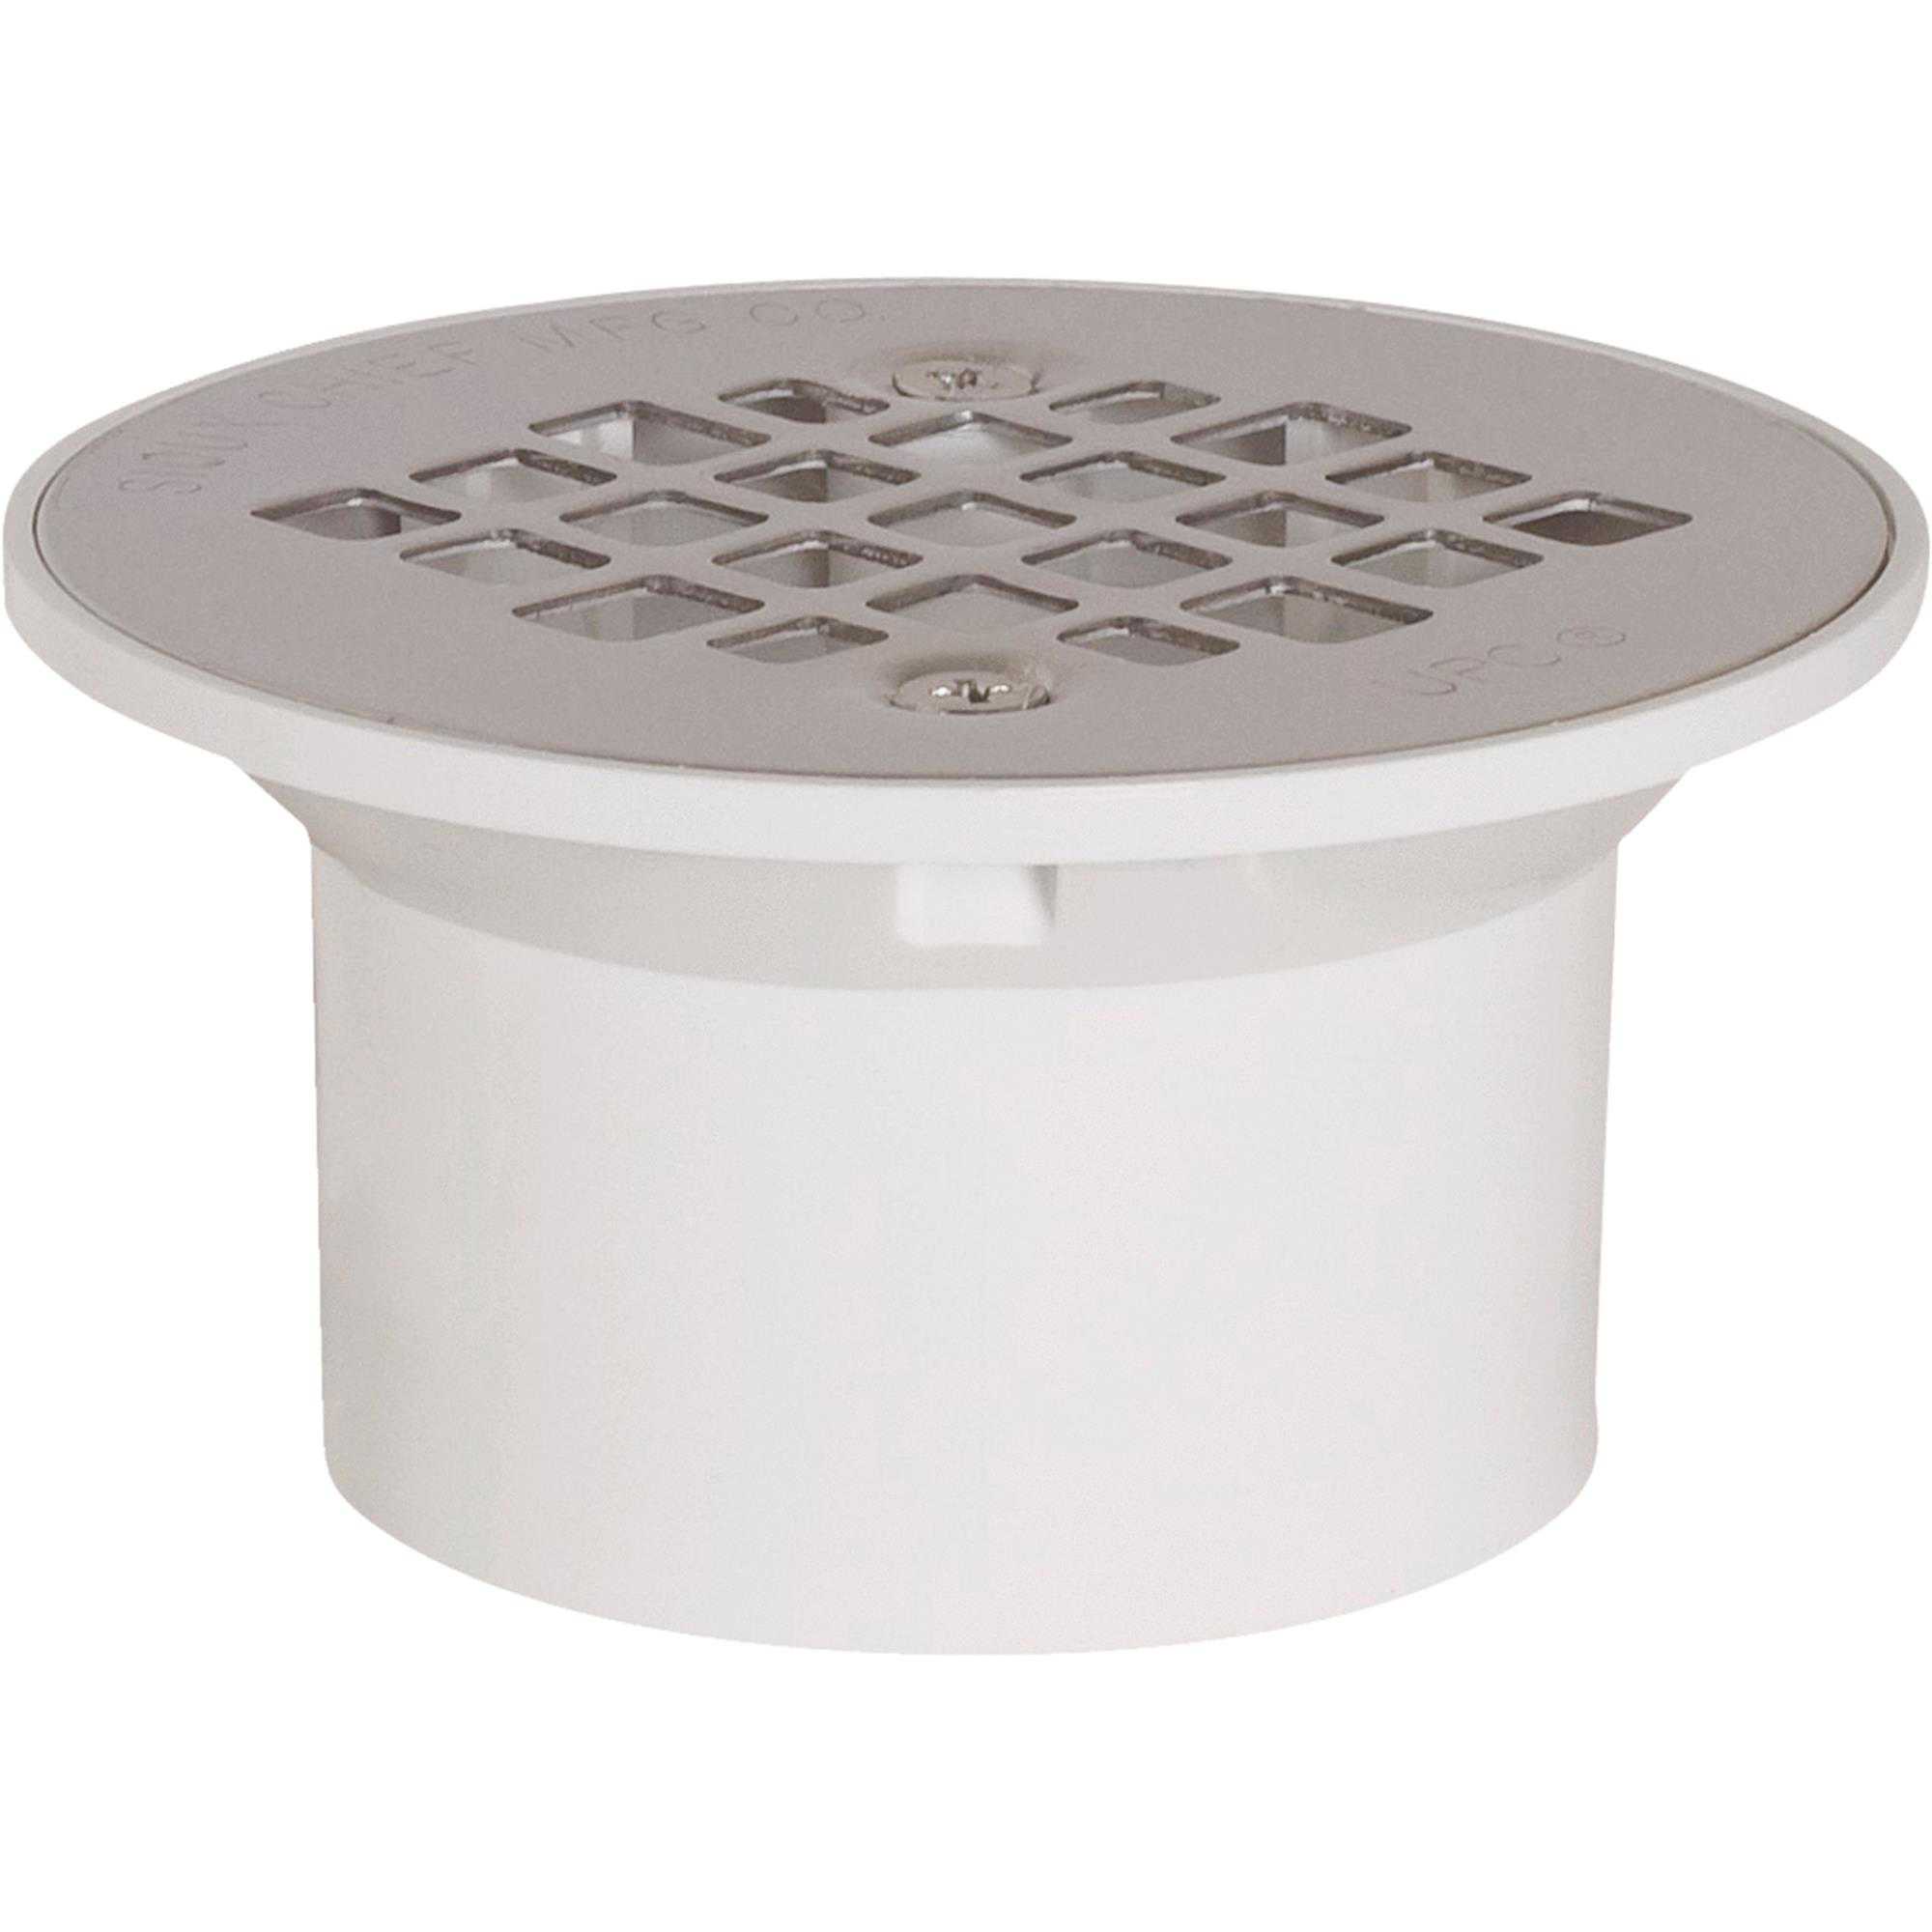 PVC Floor Drain With Stainless Steel Strainer